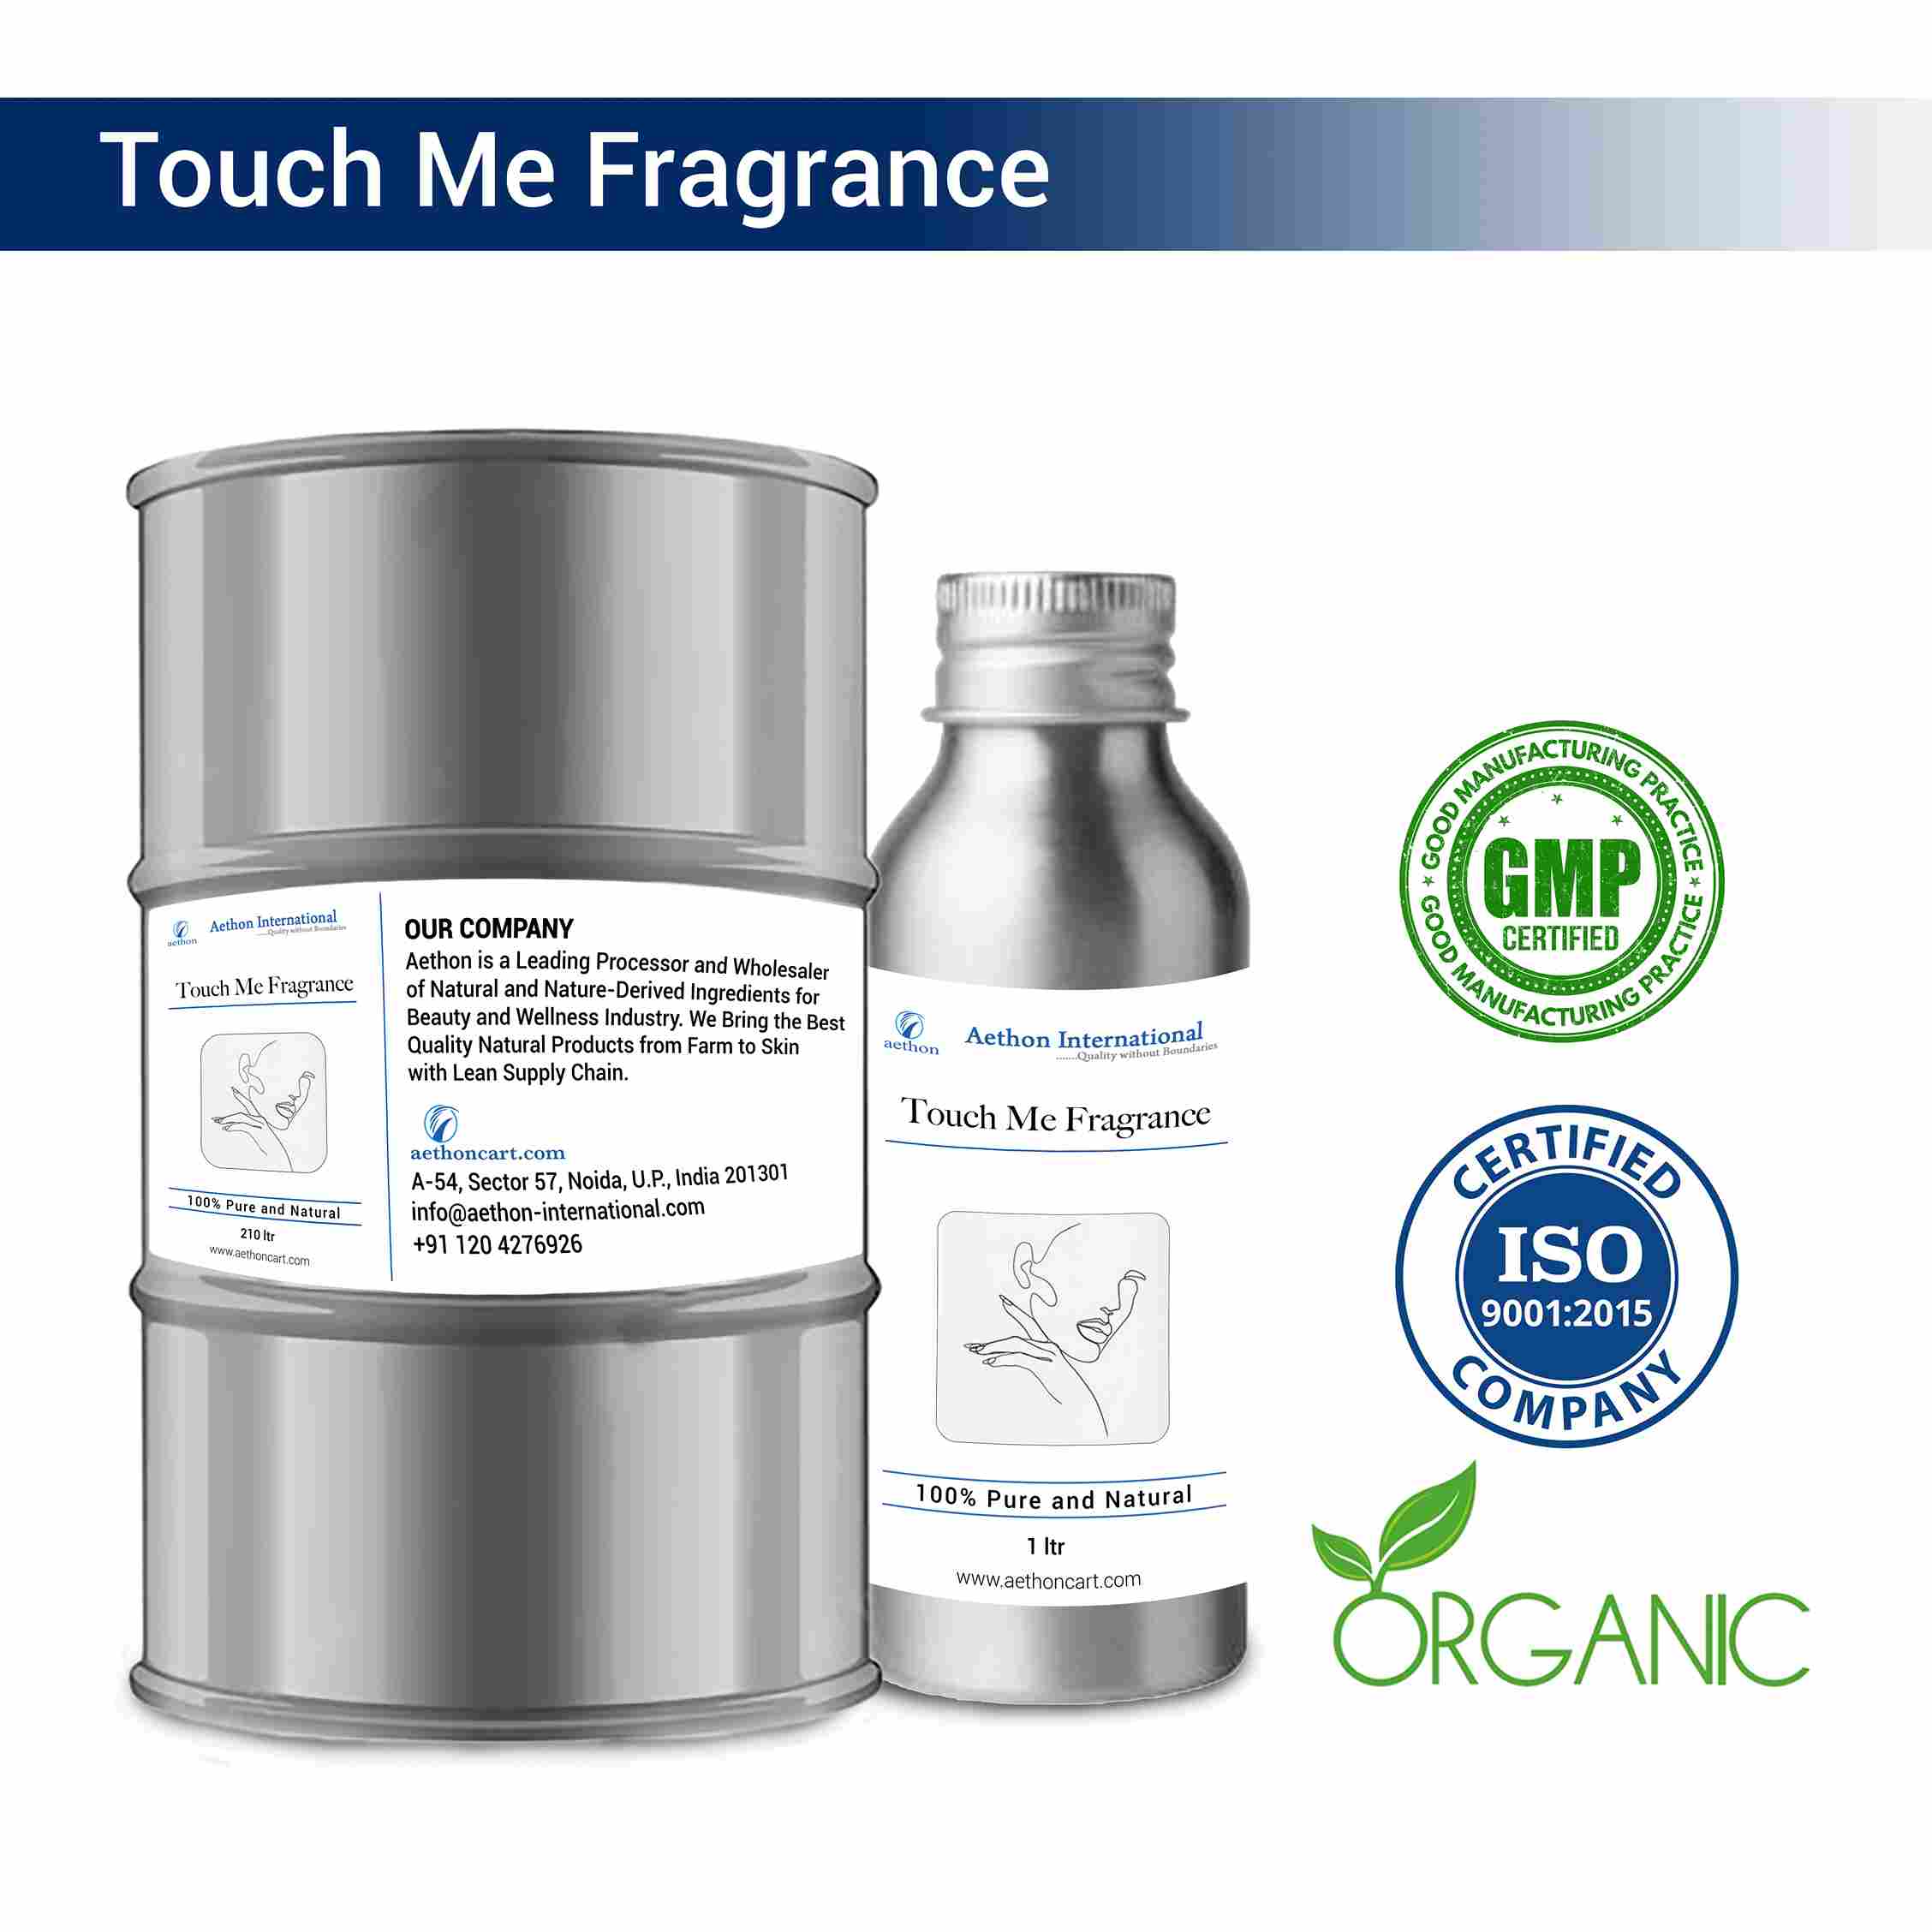 Touch Me Fragrance